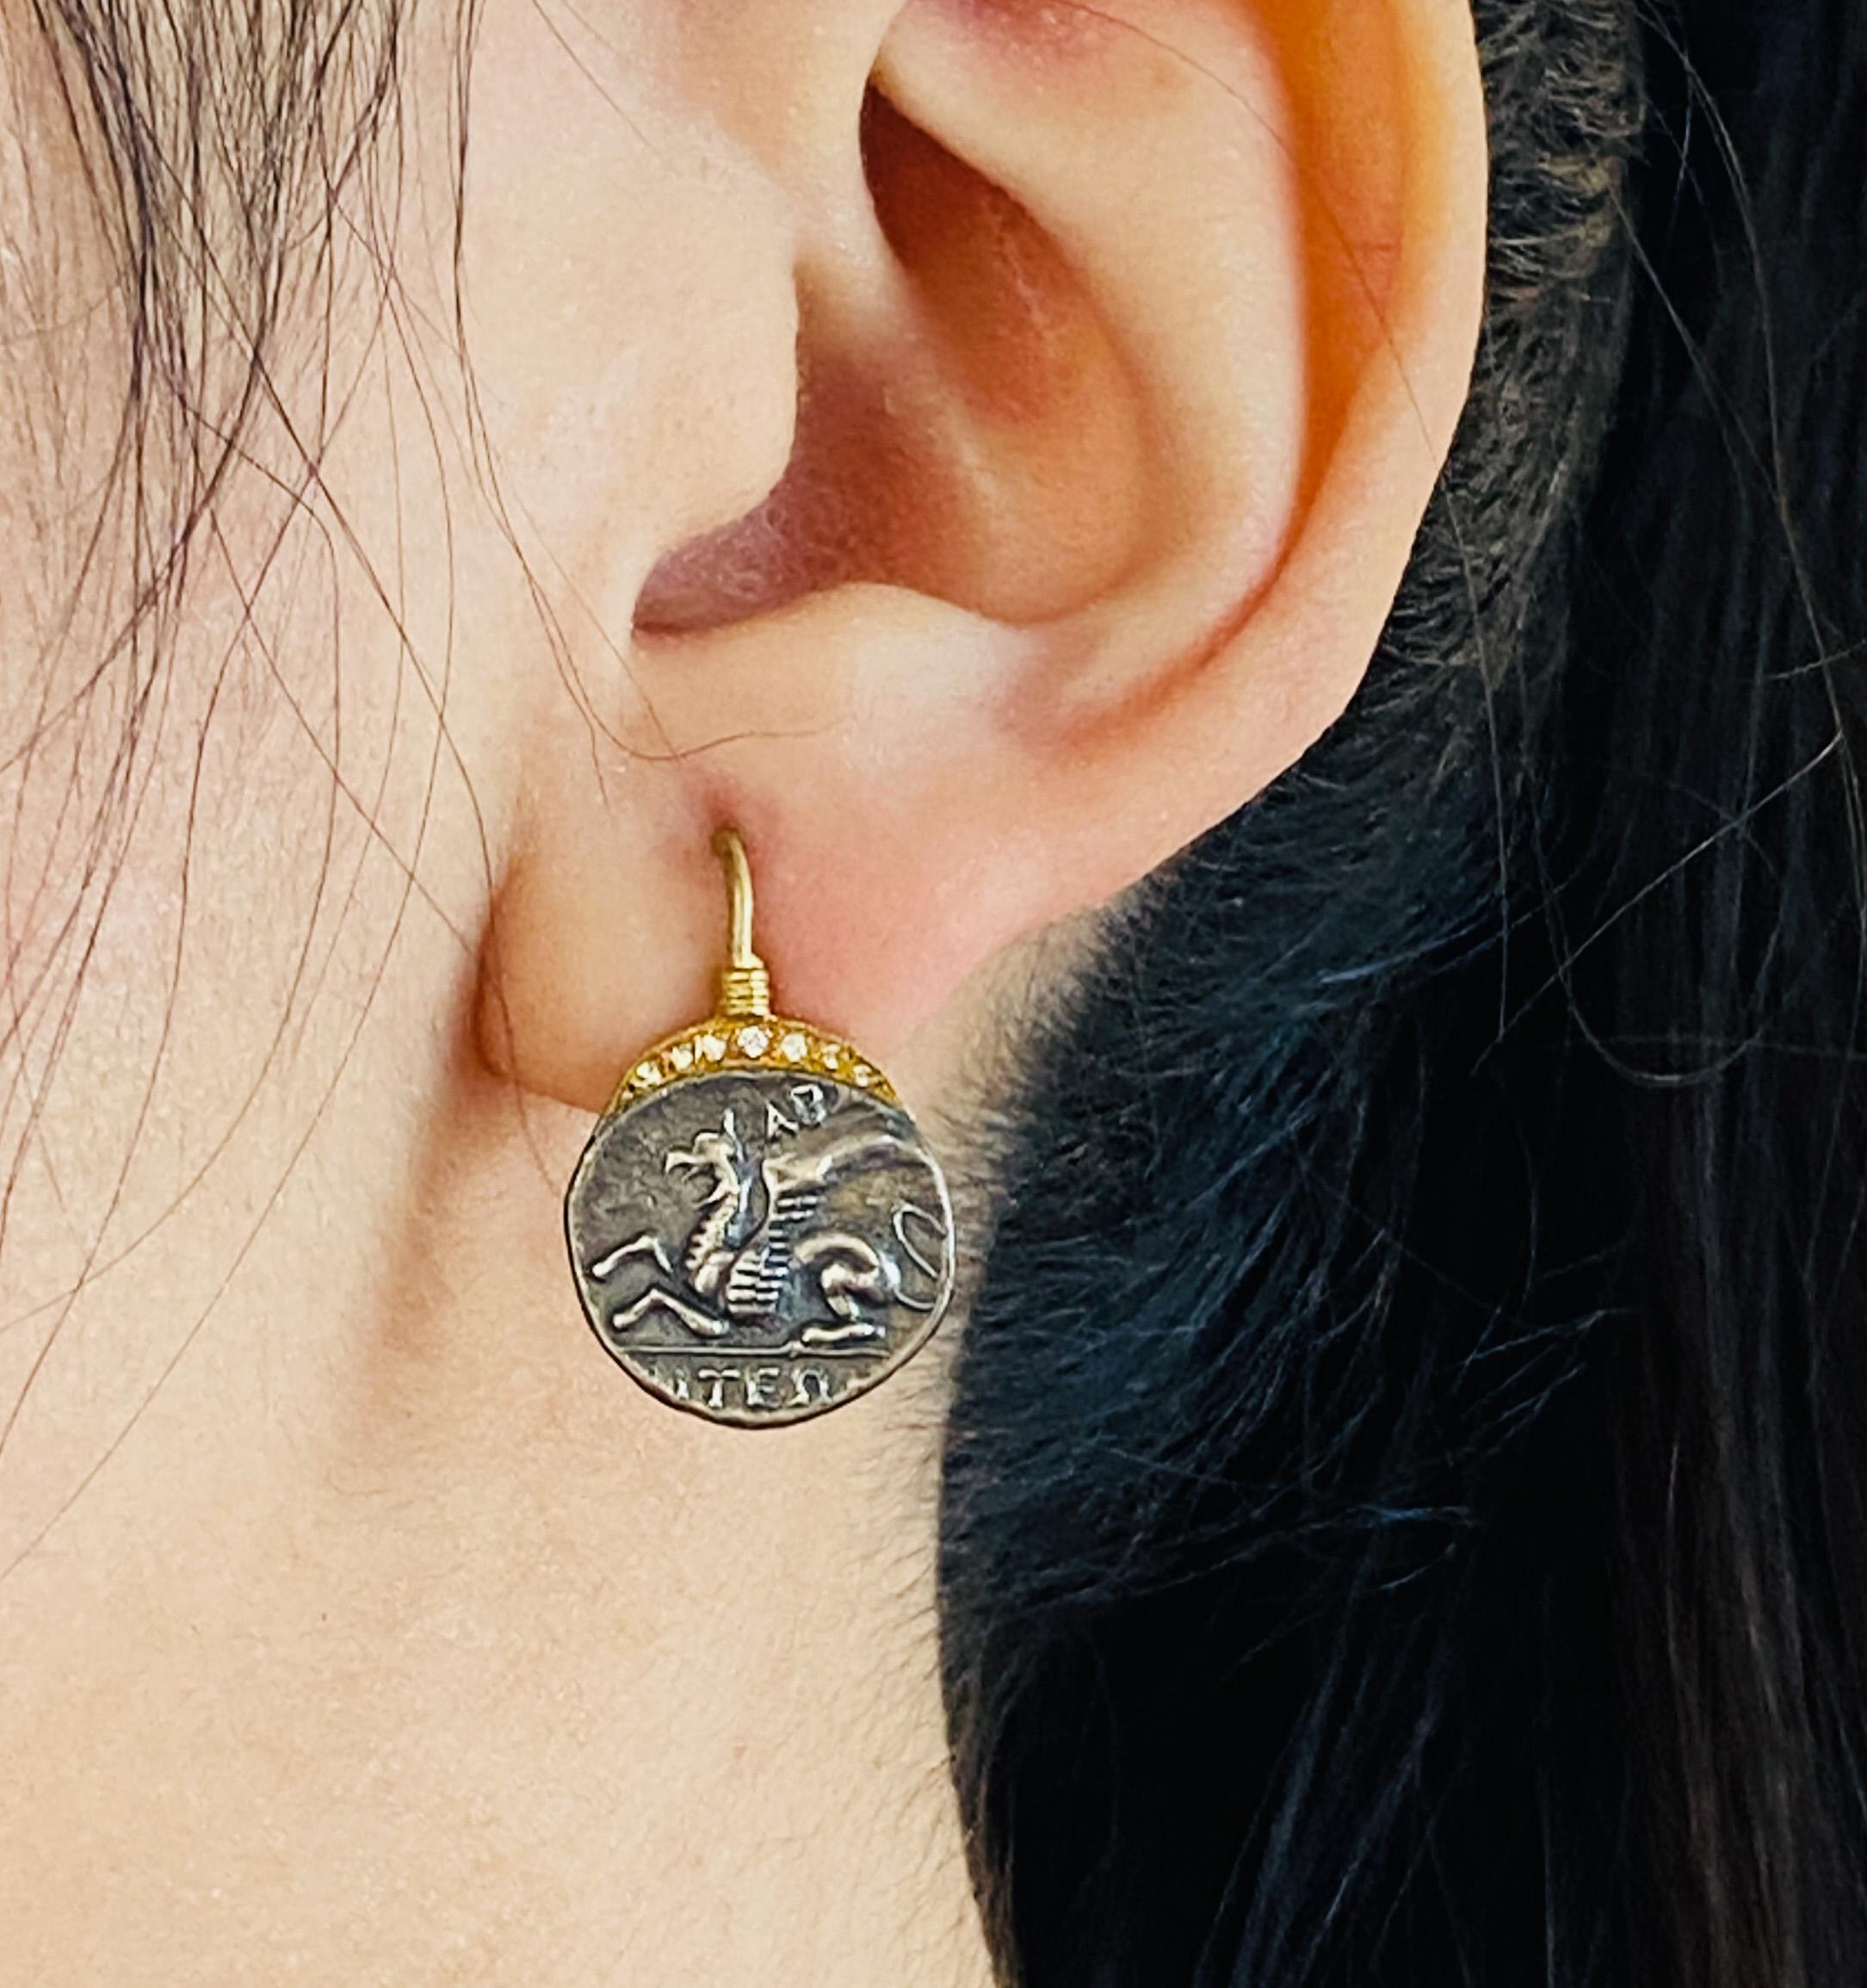 Greek Revival Pegasus Diamond Coin Earrings, 0.04 ct, 24K Yellow Gold and Sterling Silver